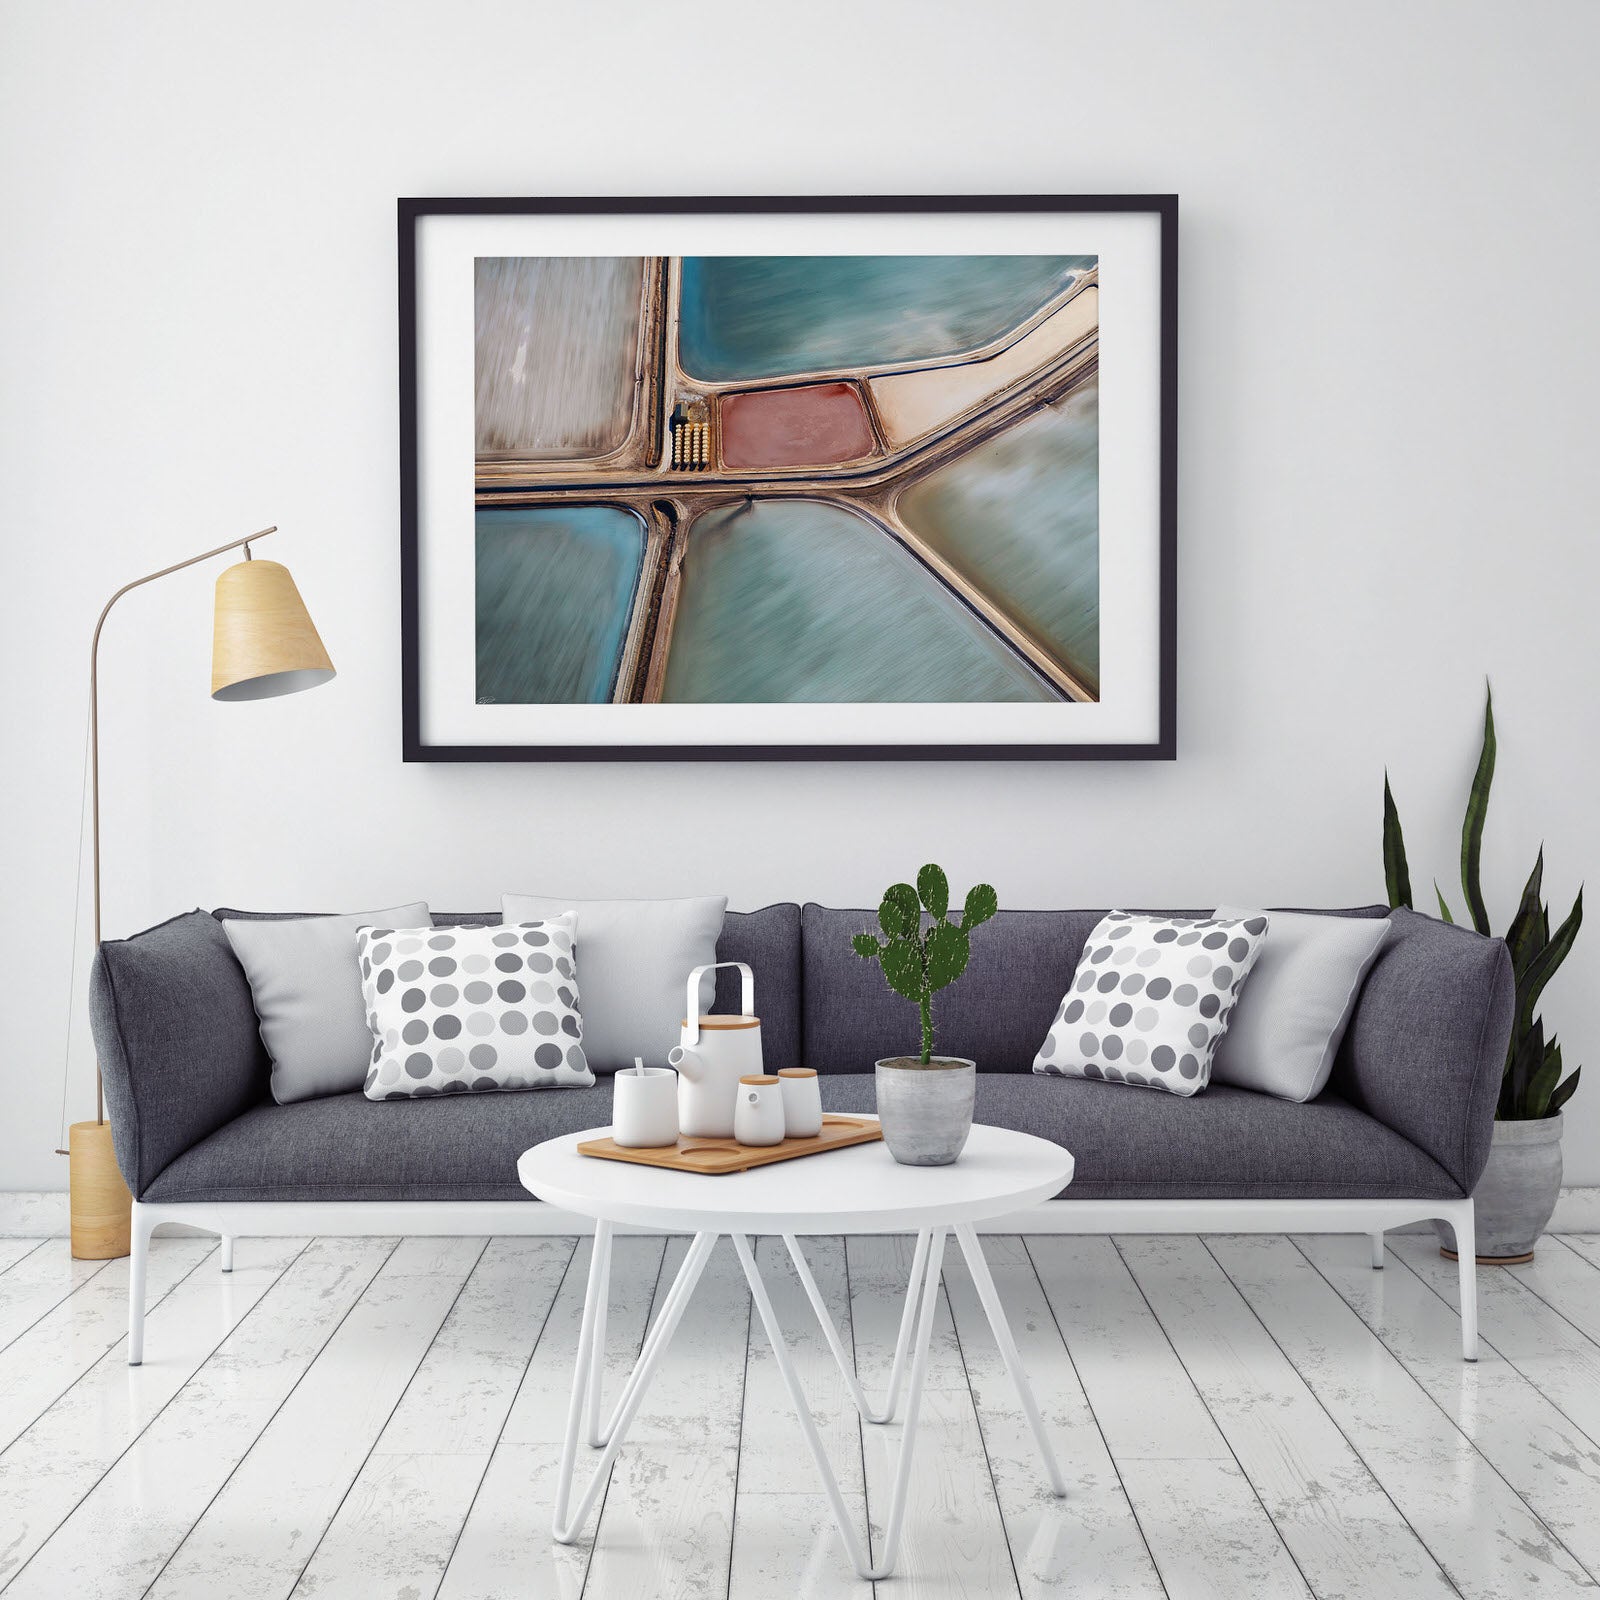 picture hanging on wall abstract art and couch with black frame